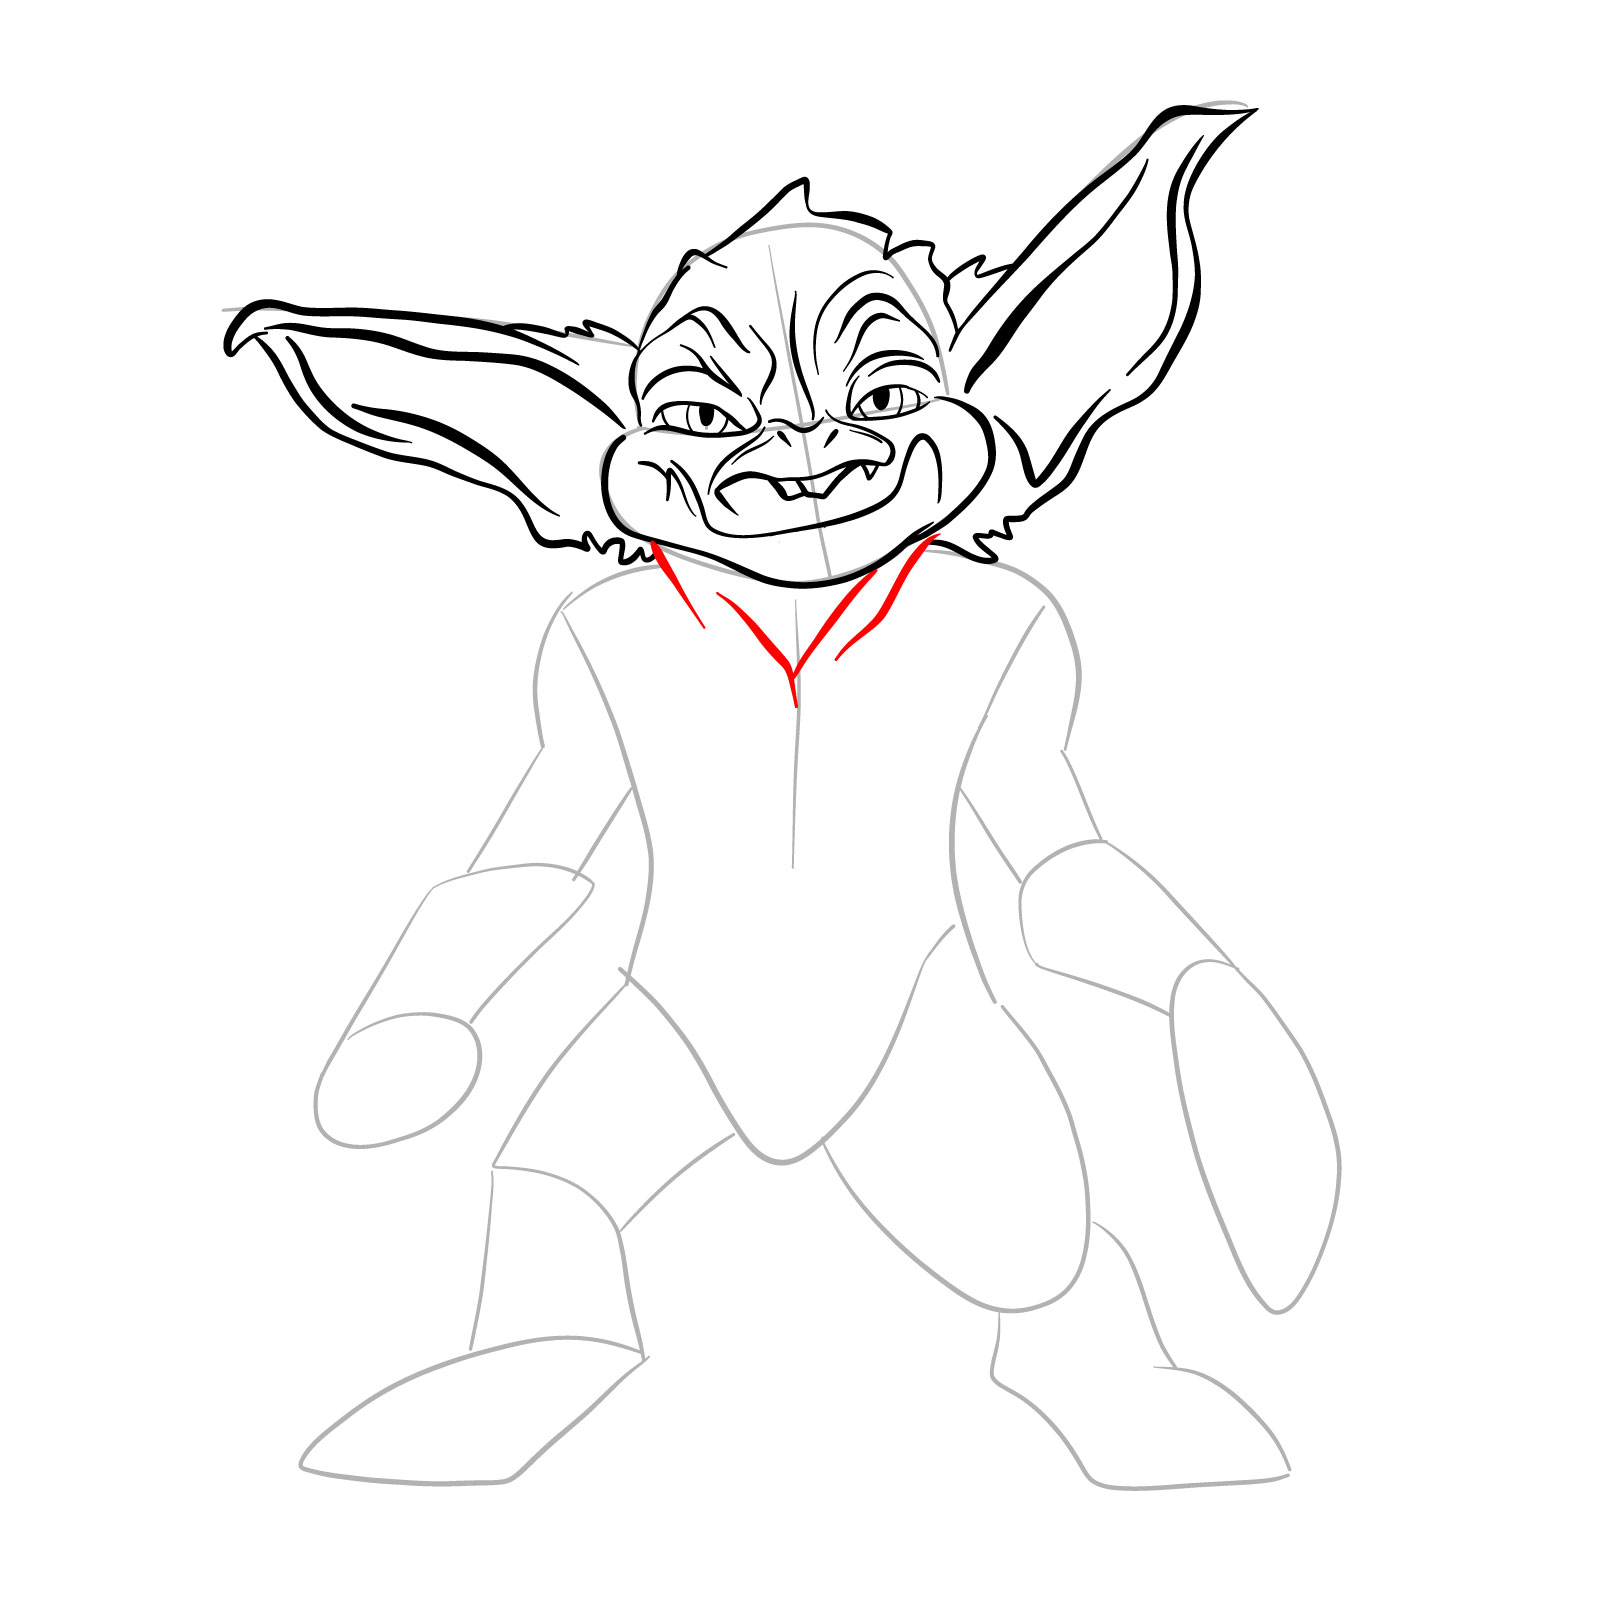 How to draw a Goblin - step 15